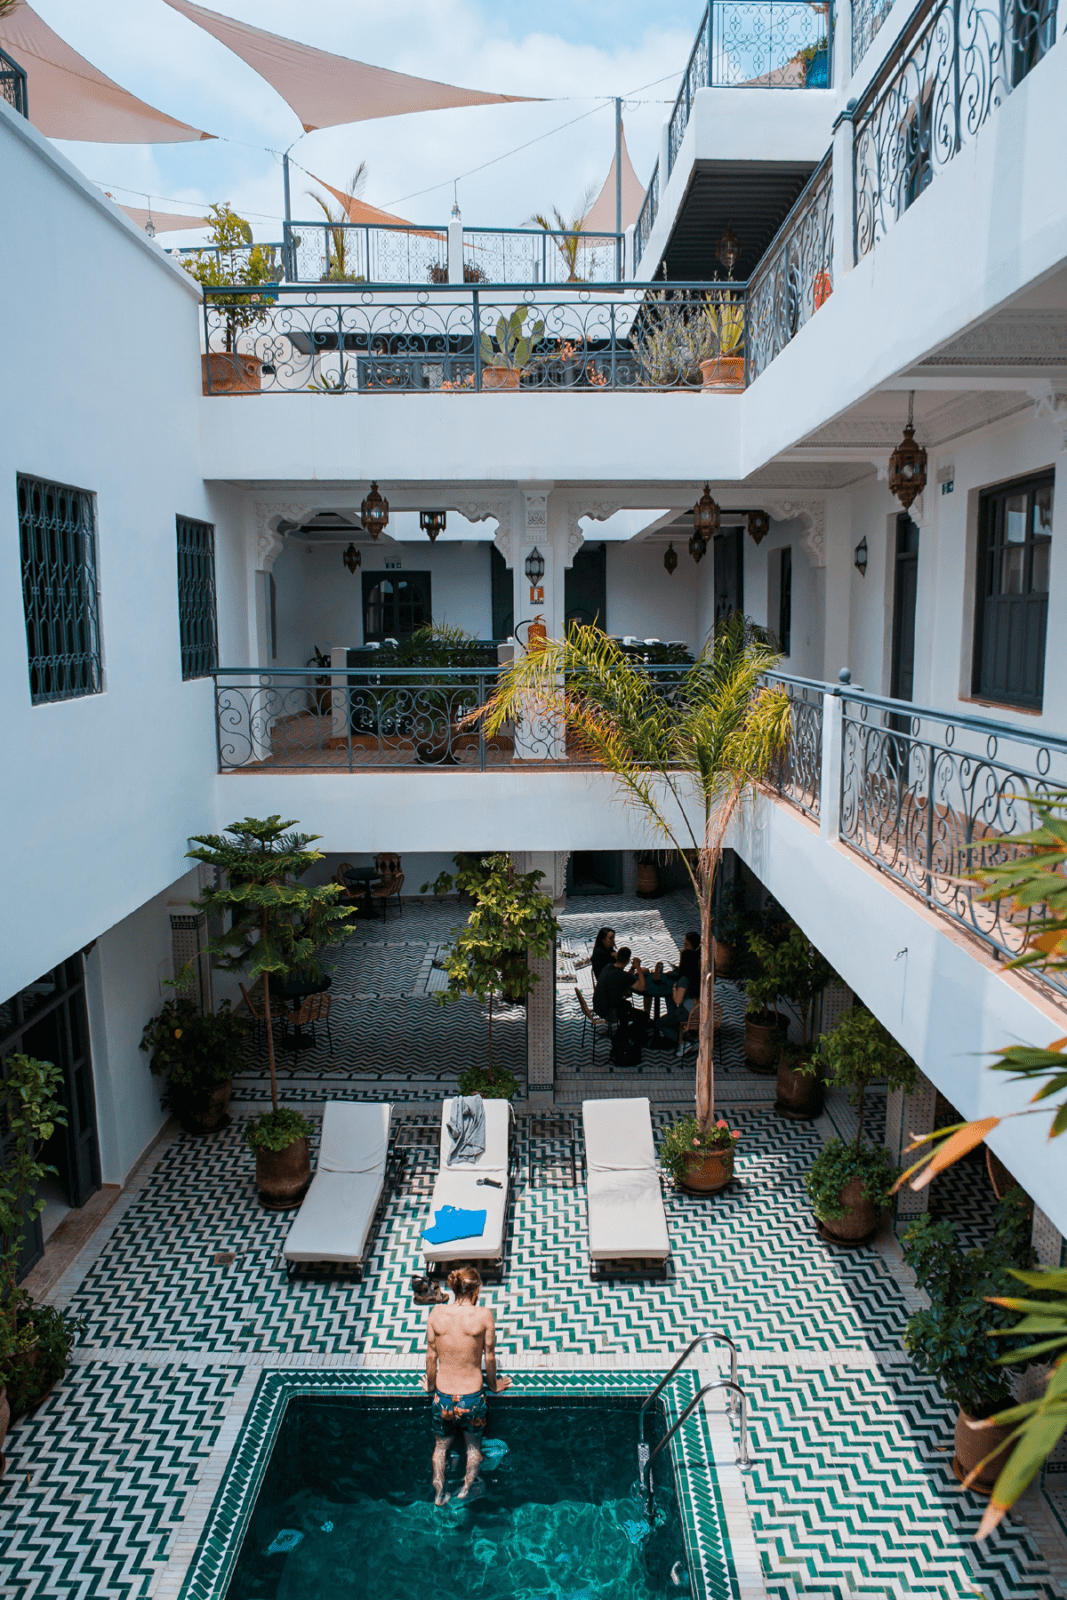 Traditional Riads - Things to Do in Marrakech